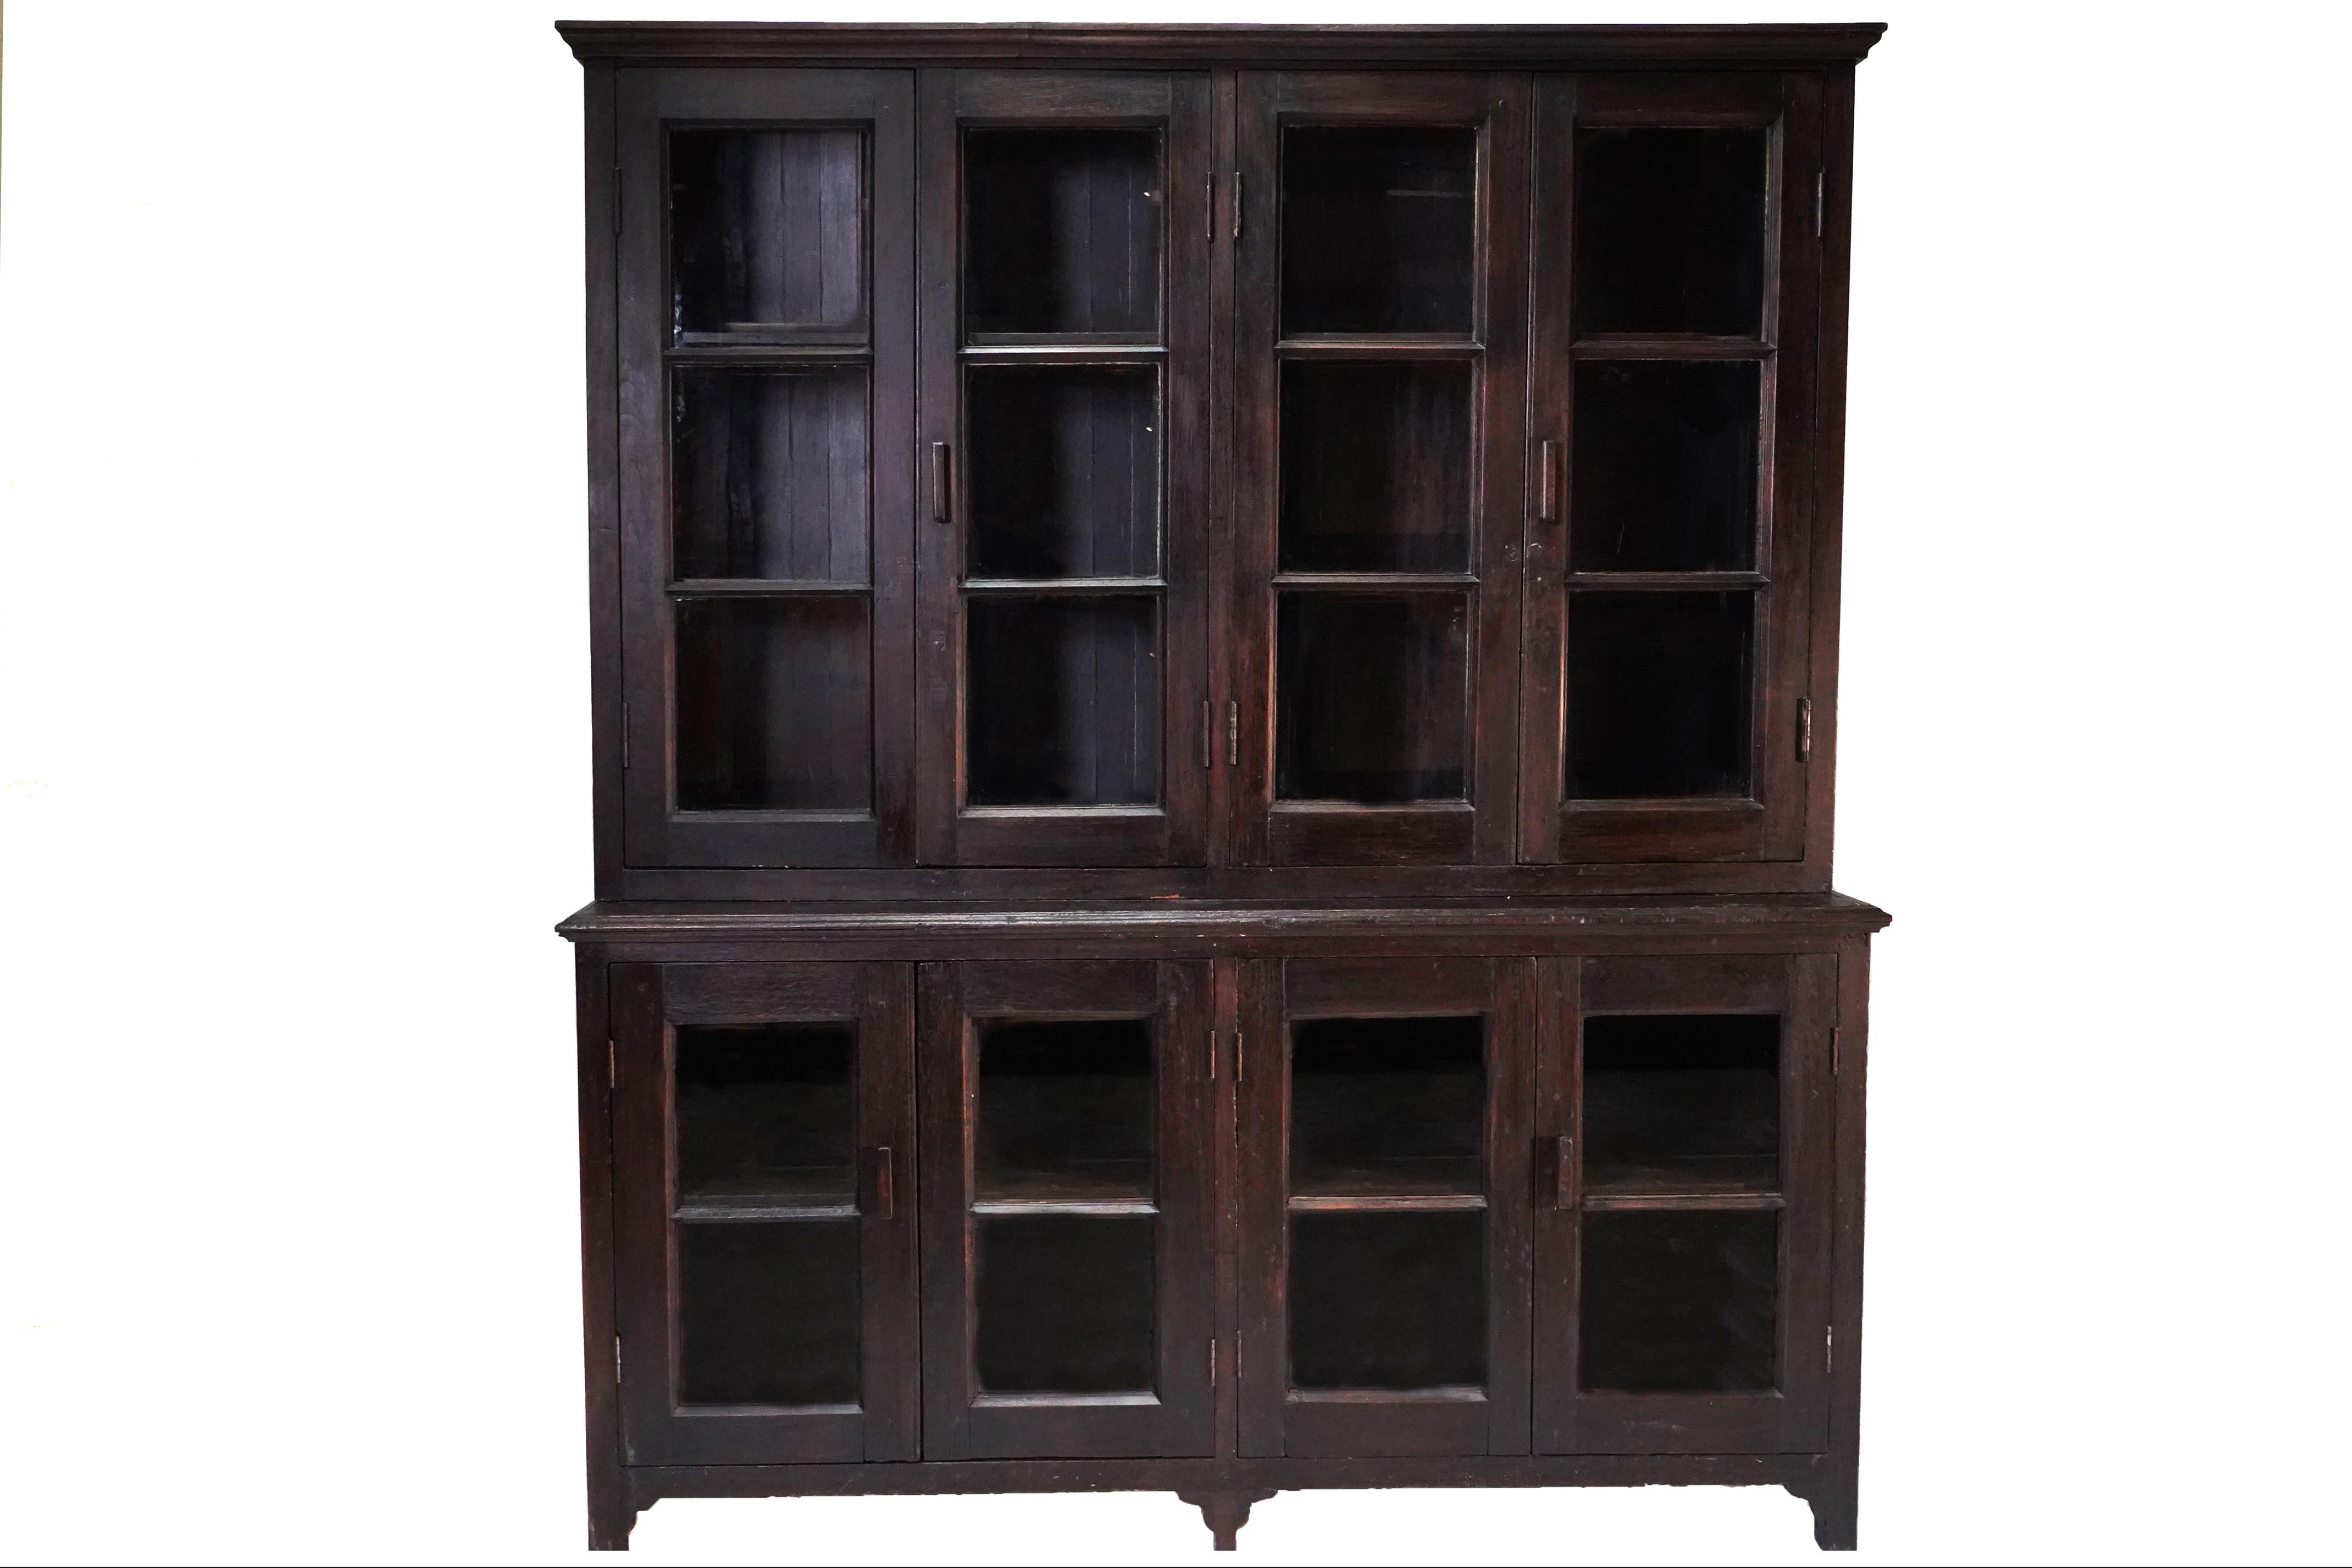 This large antique book cabinet was made from solid teak wood and dates to the early 1900's. During the British Empire in India and Burma much furniture was made in the Anglo-Indian style using native hardwoods and native craftsmen. Styles closely